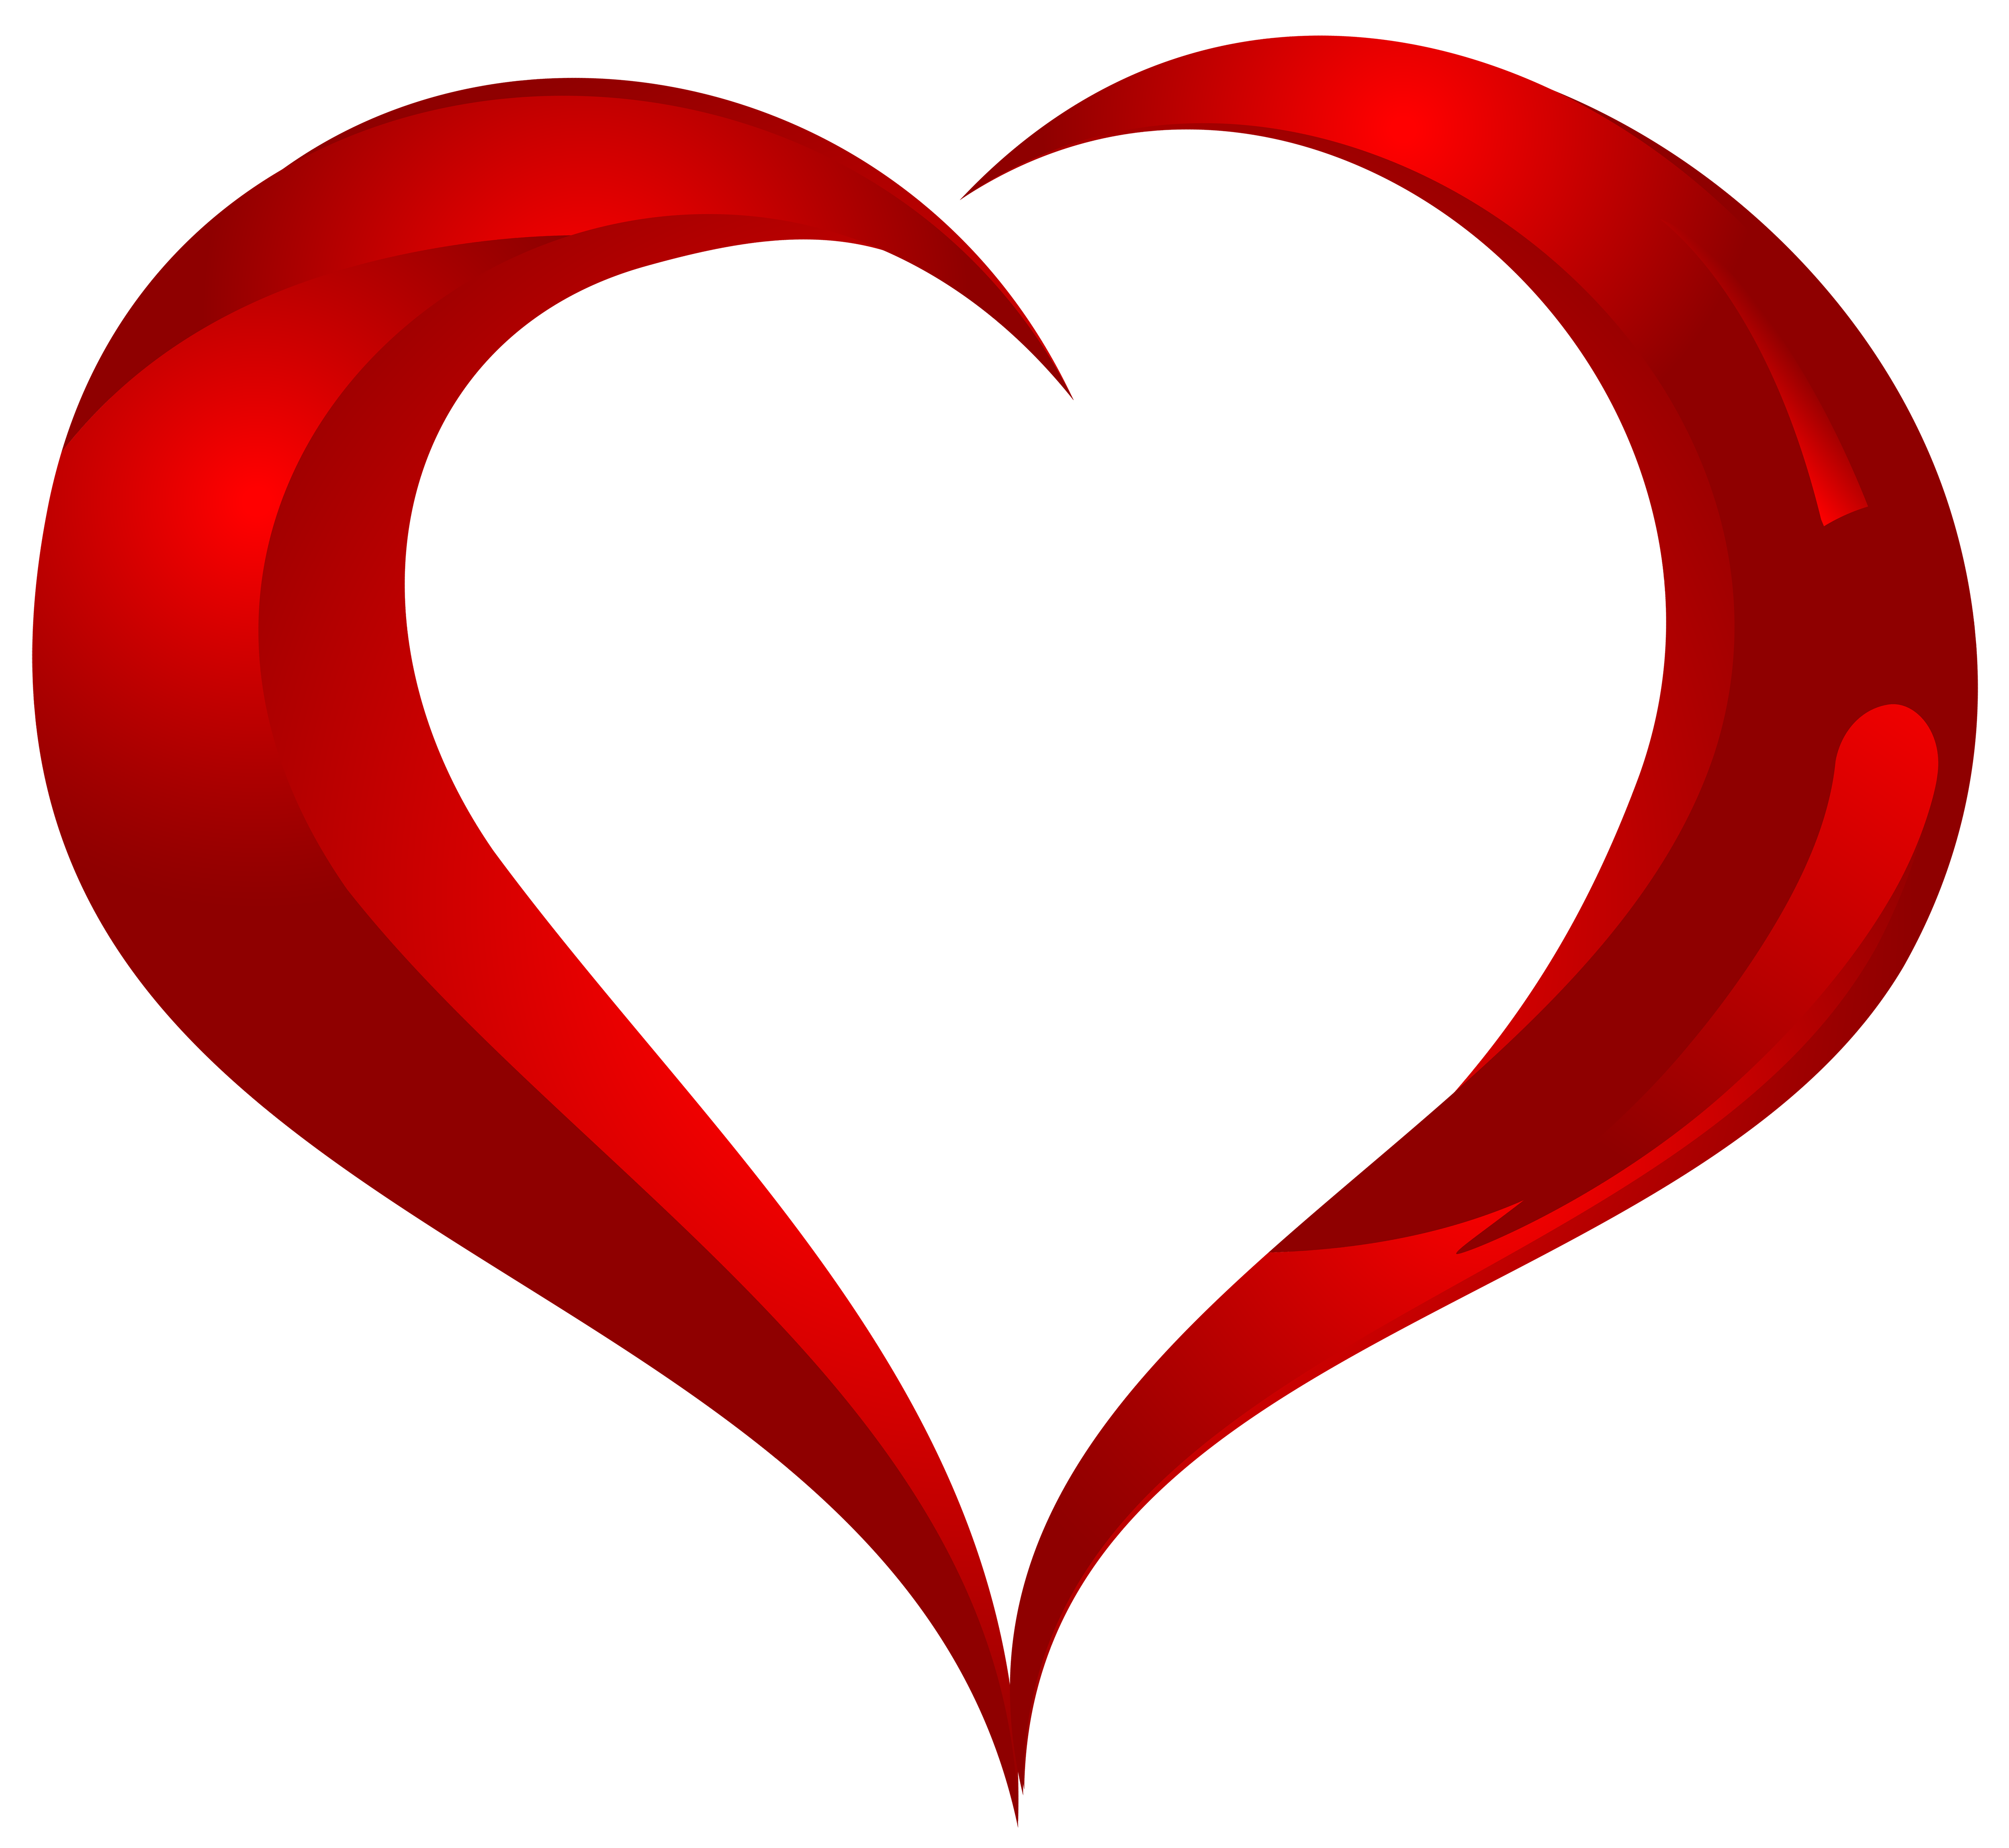 Beautiful heart clipart best. Hearts png images